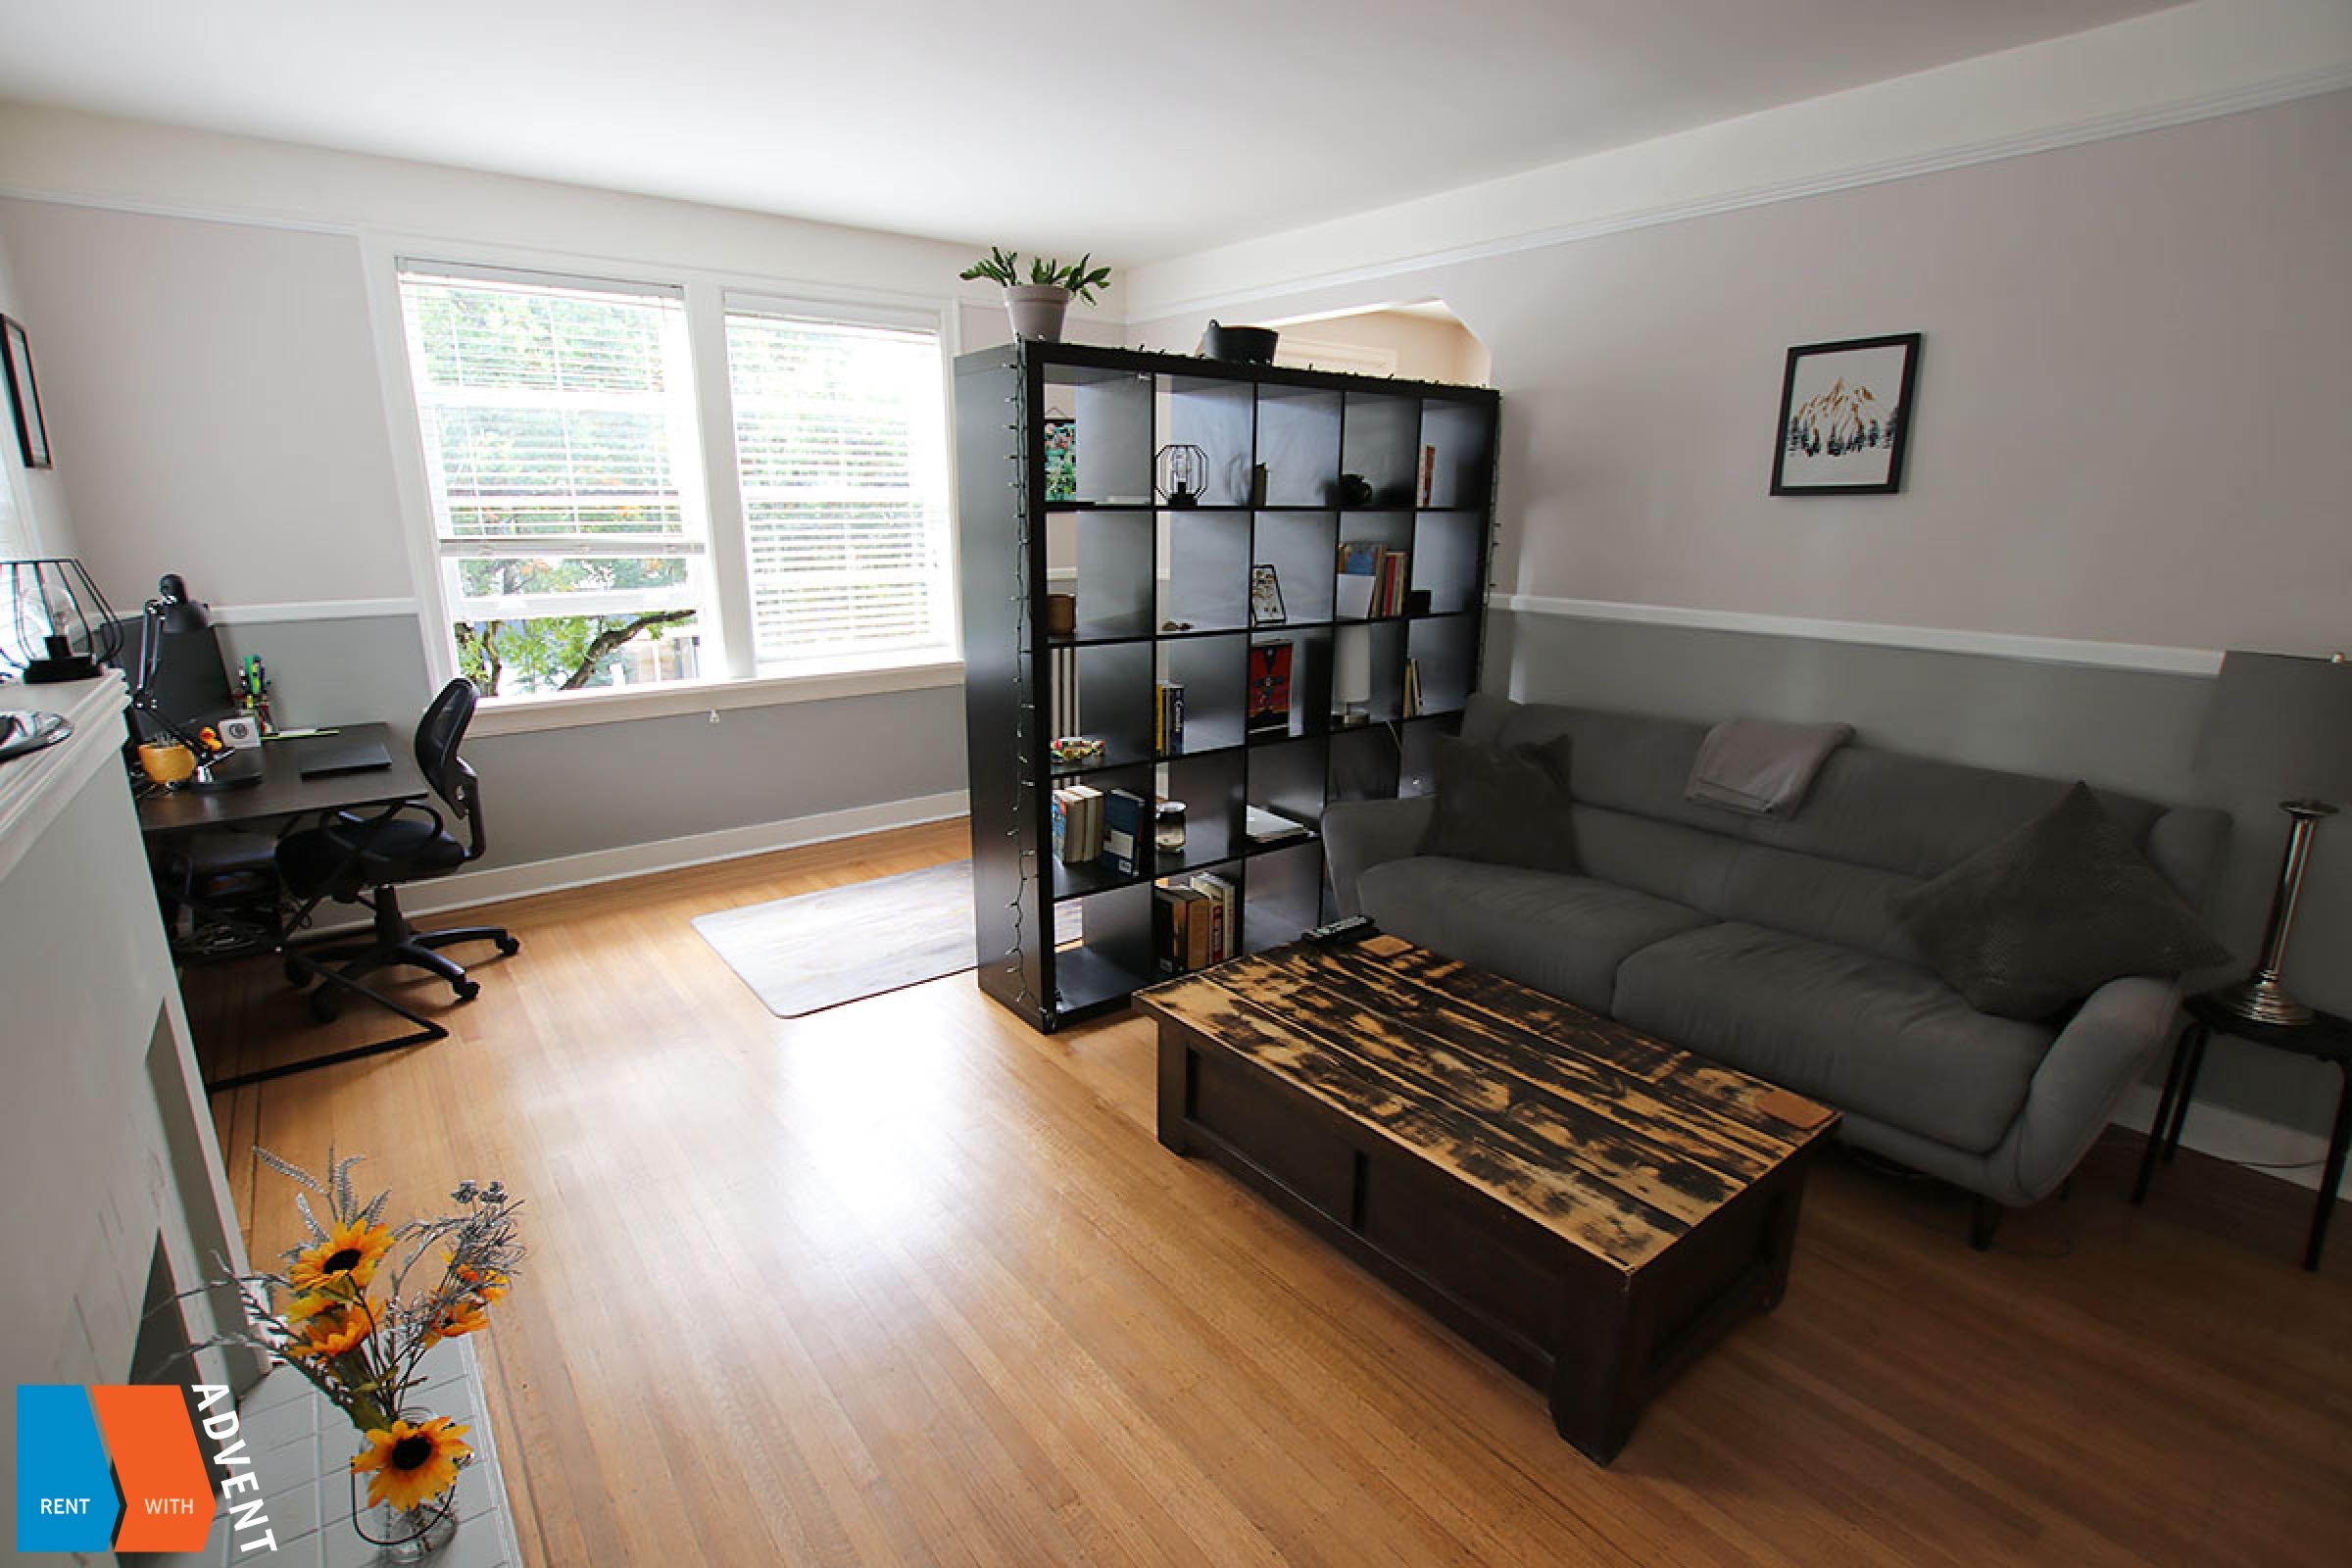 Unfurnished 1 Bedroom Apartment Rental at 1235 Burnaby in Vancouver's West End. 10 - 1235 Burnaby Street, Vancouver, BC, Canada.